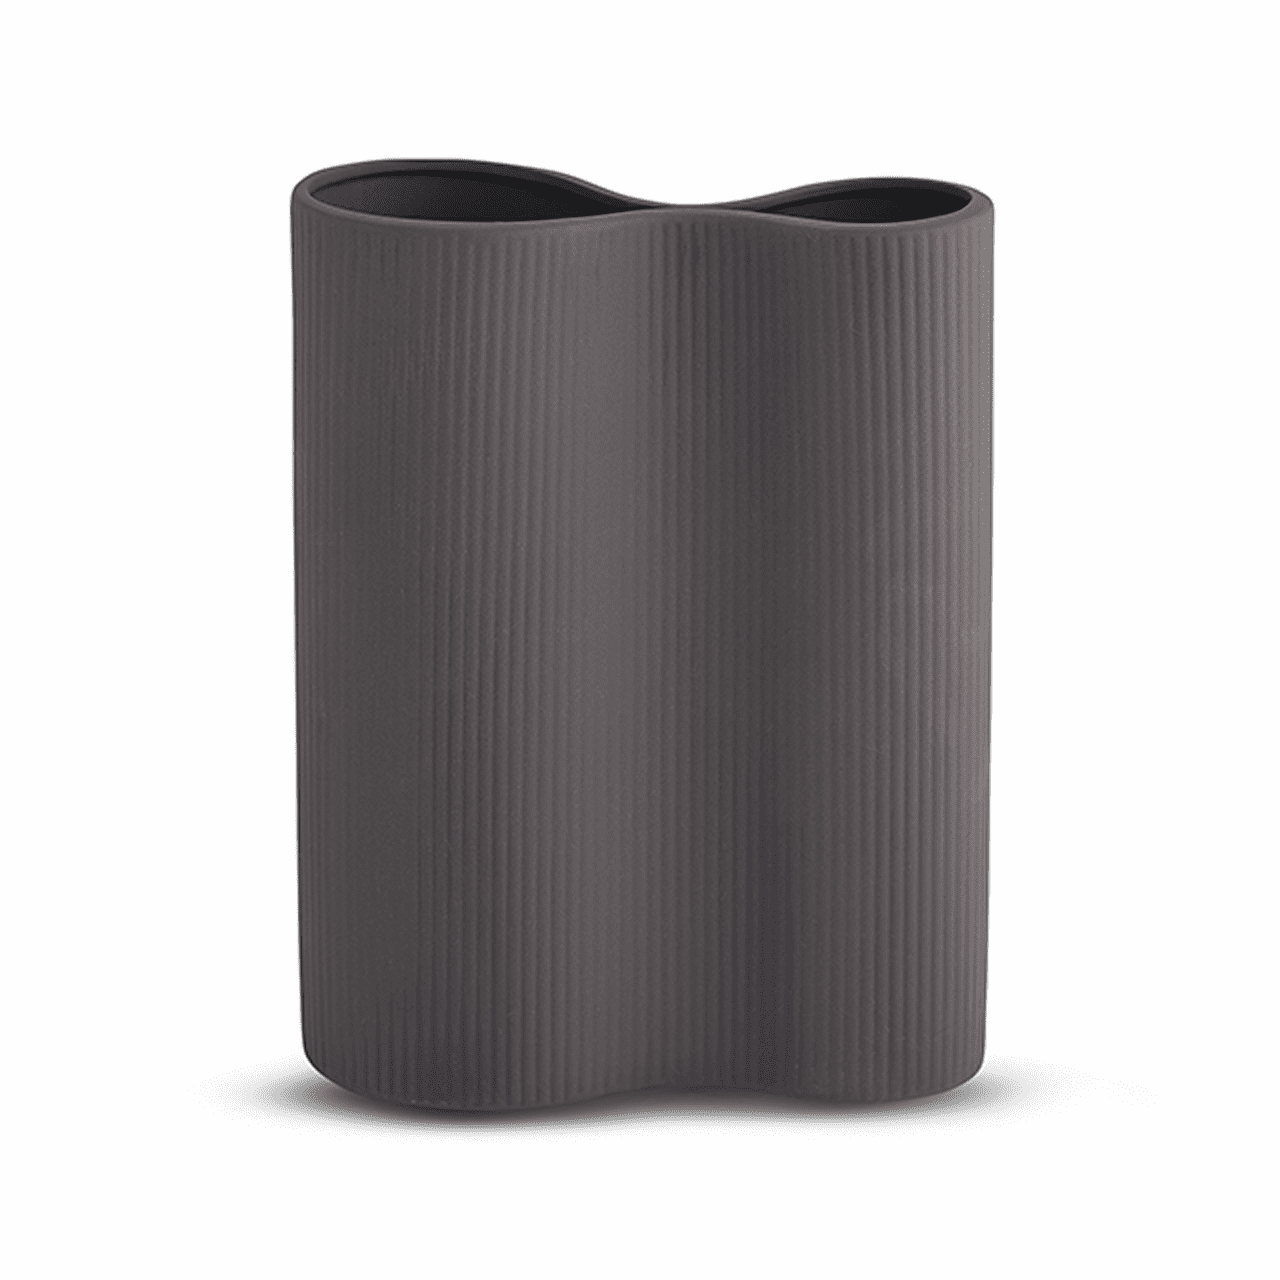 Ribbed Infinity Vase in Charcoal | Home Office Decor | The Home Office Australia